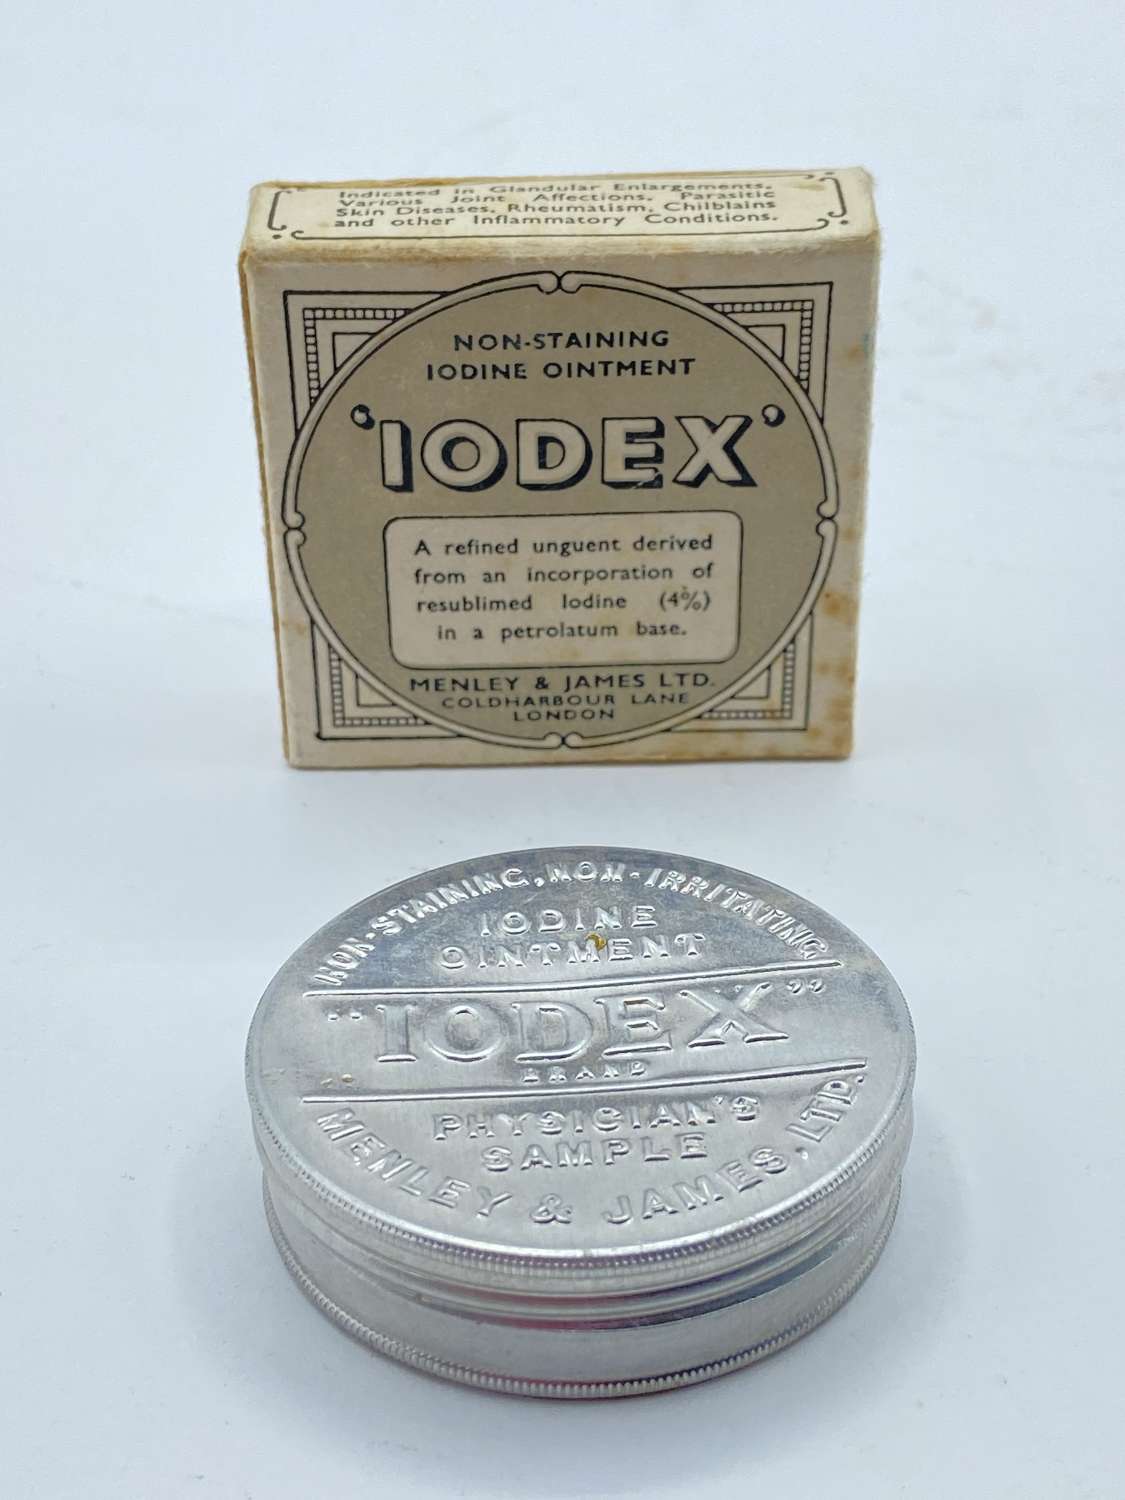 WW2 British Physicians Pharmaceutical Home Front Iodex Ointment